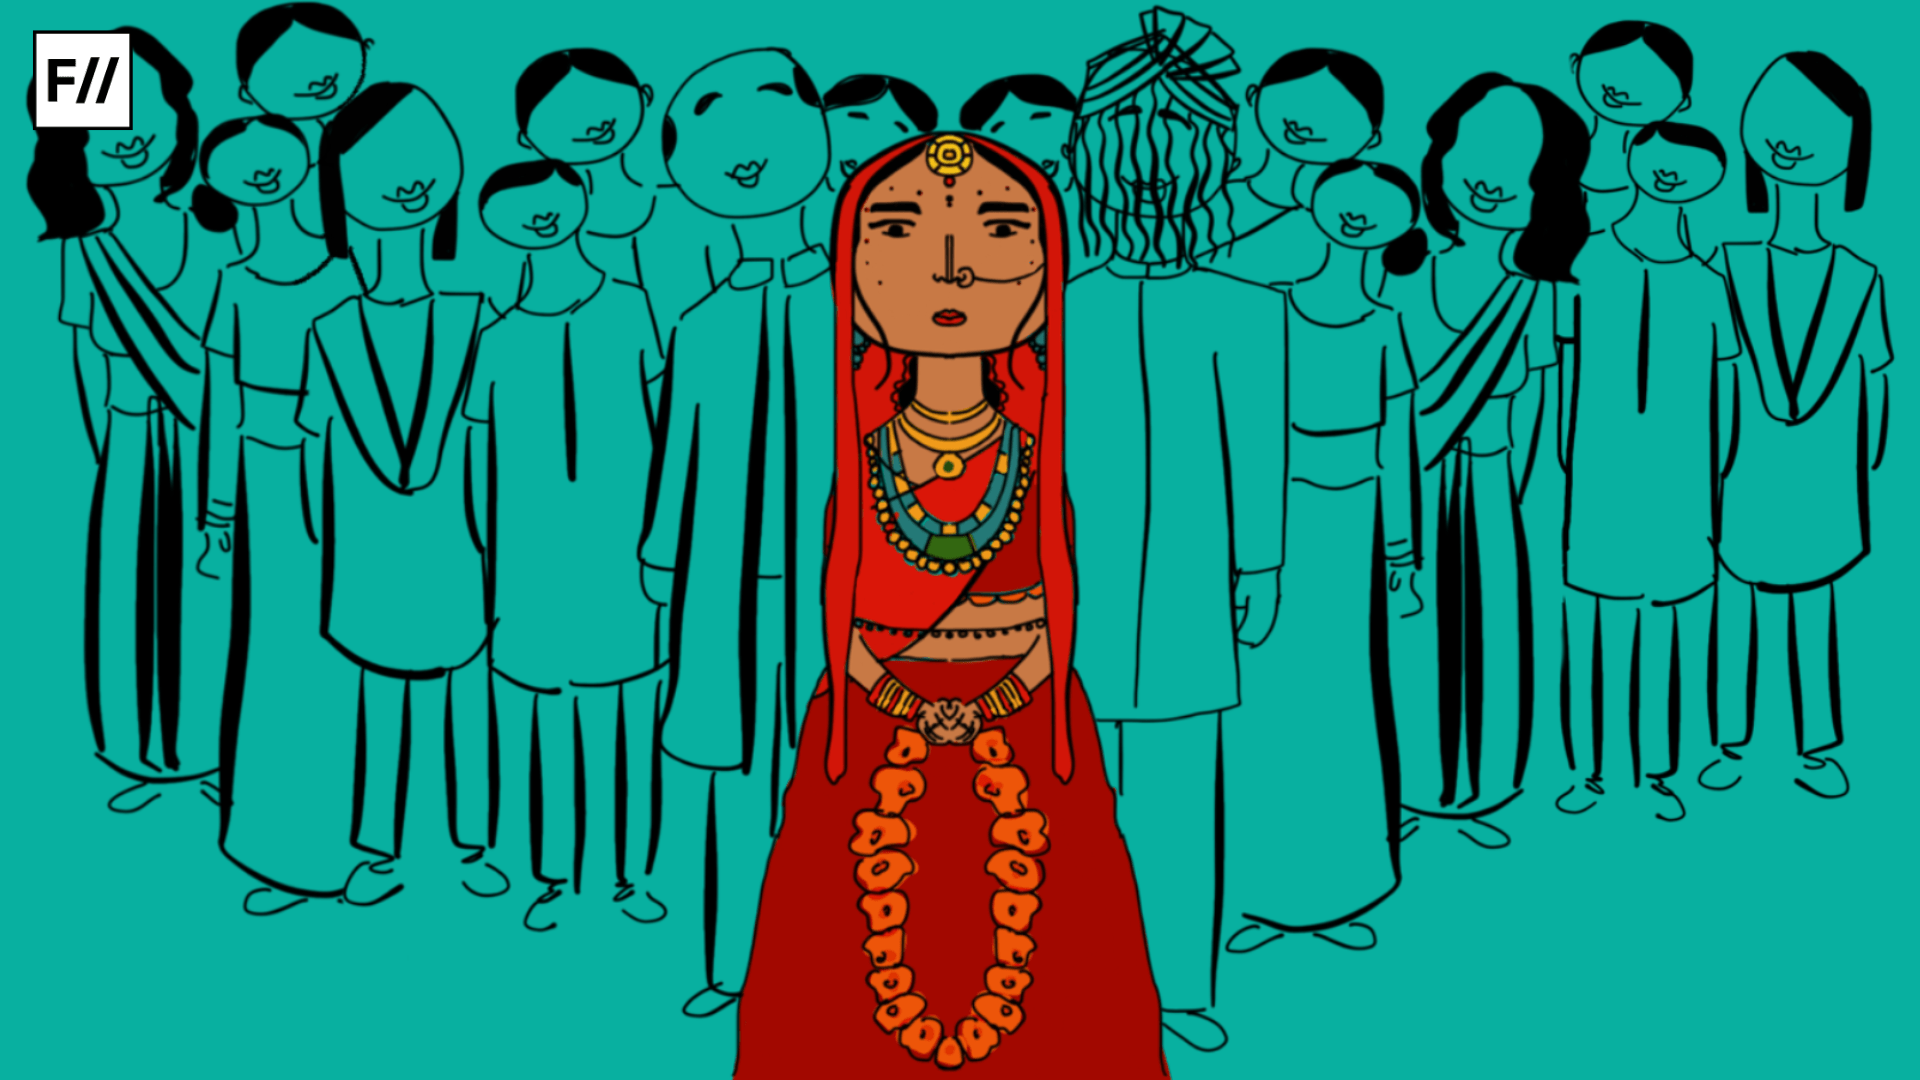 Image of a South Asian bride